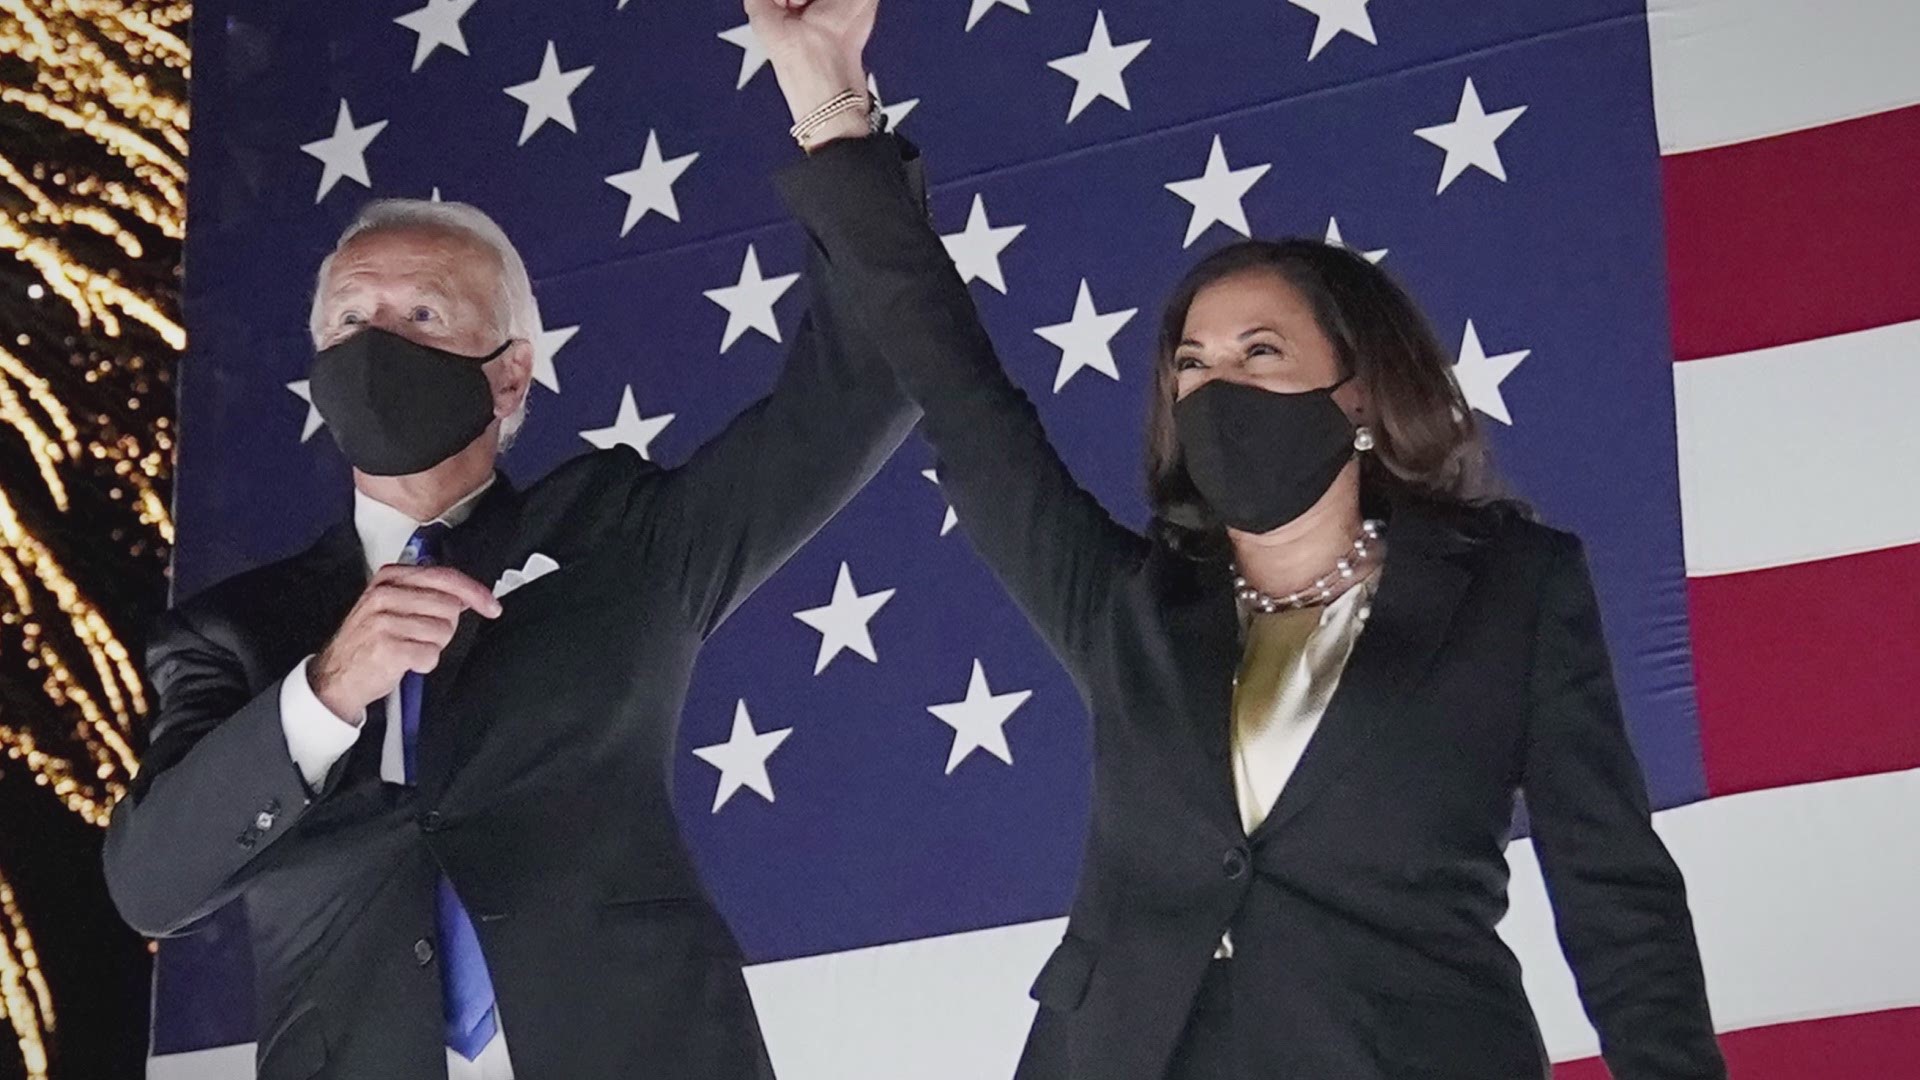 The VERIFY team analyzed claims from Joe Biden, Cory Booker and more.